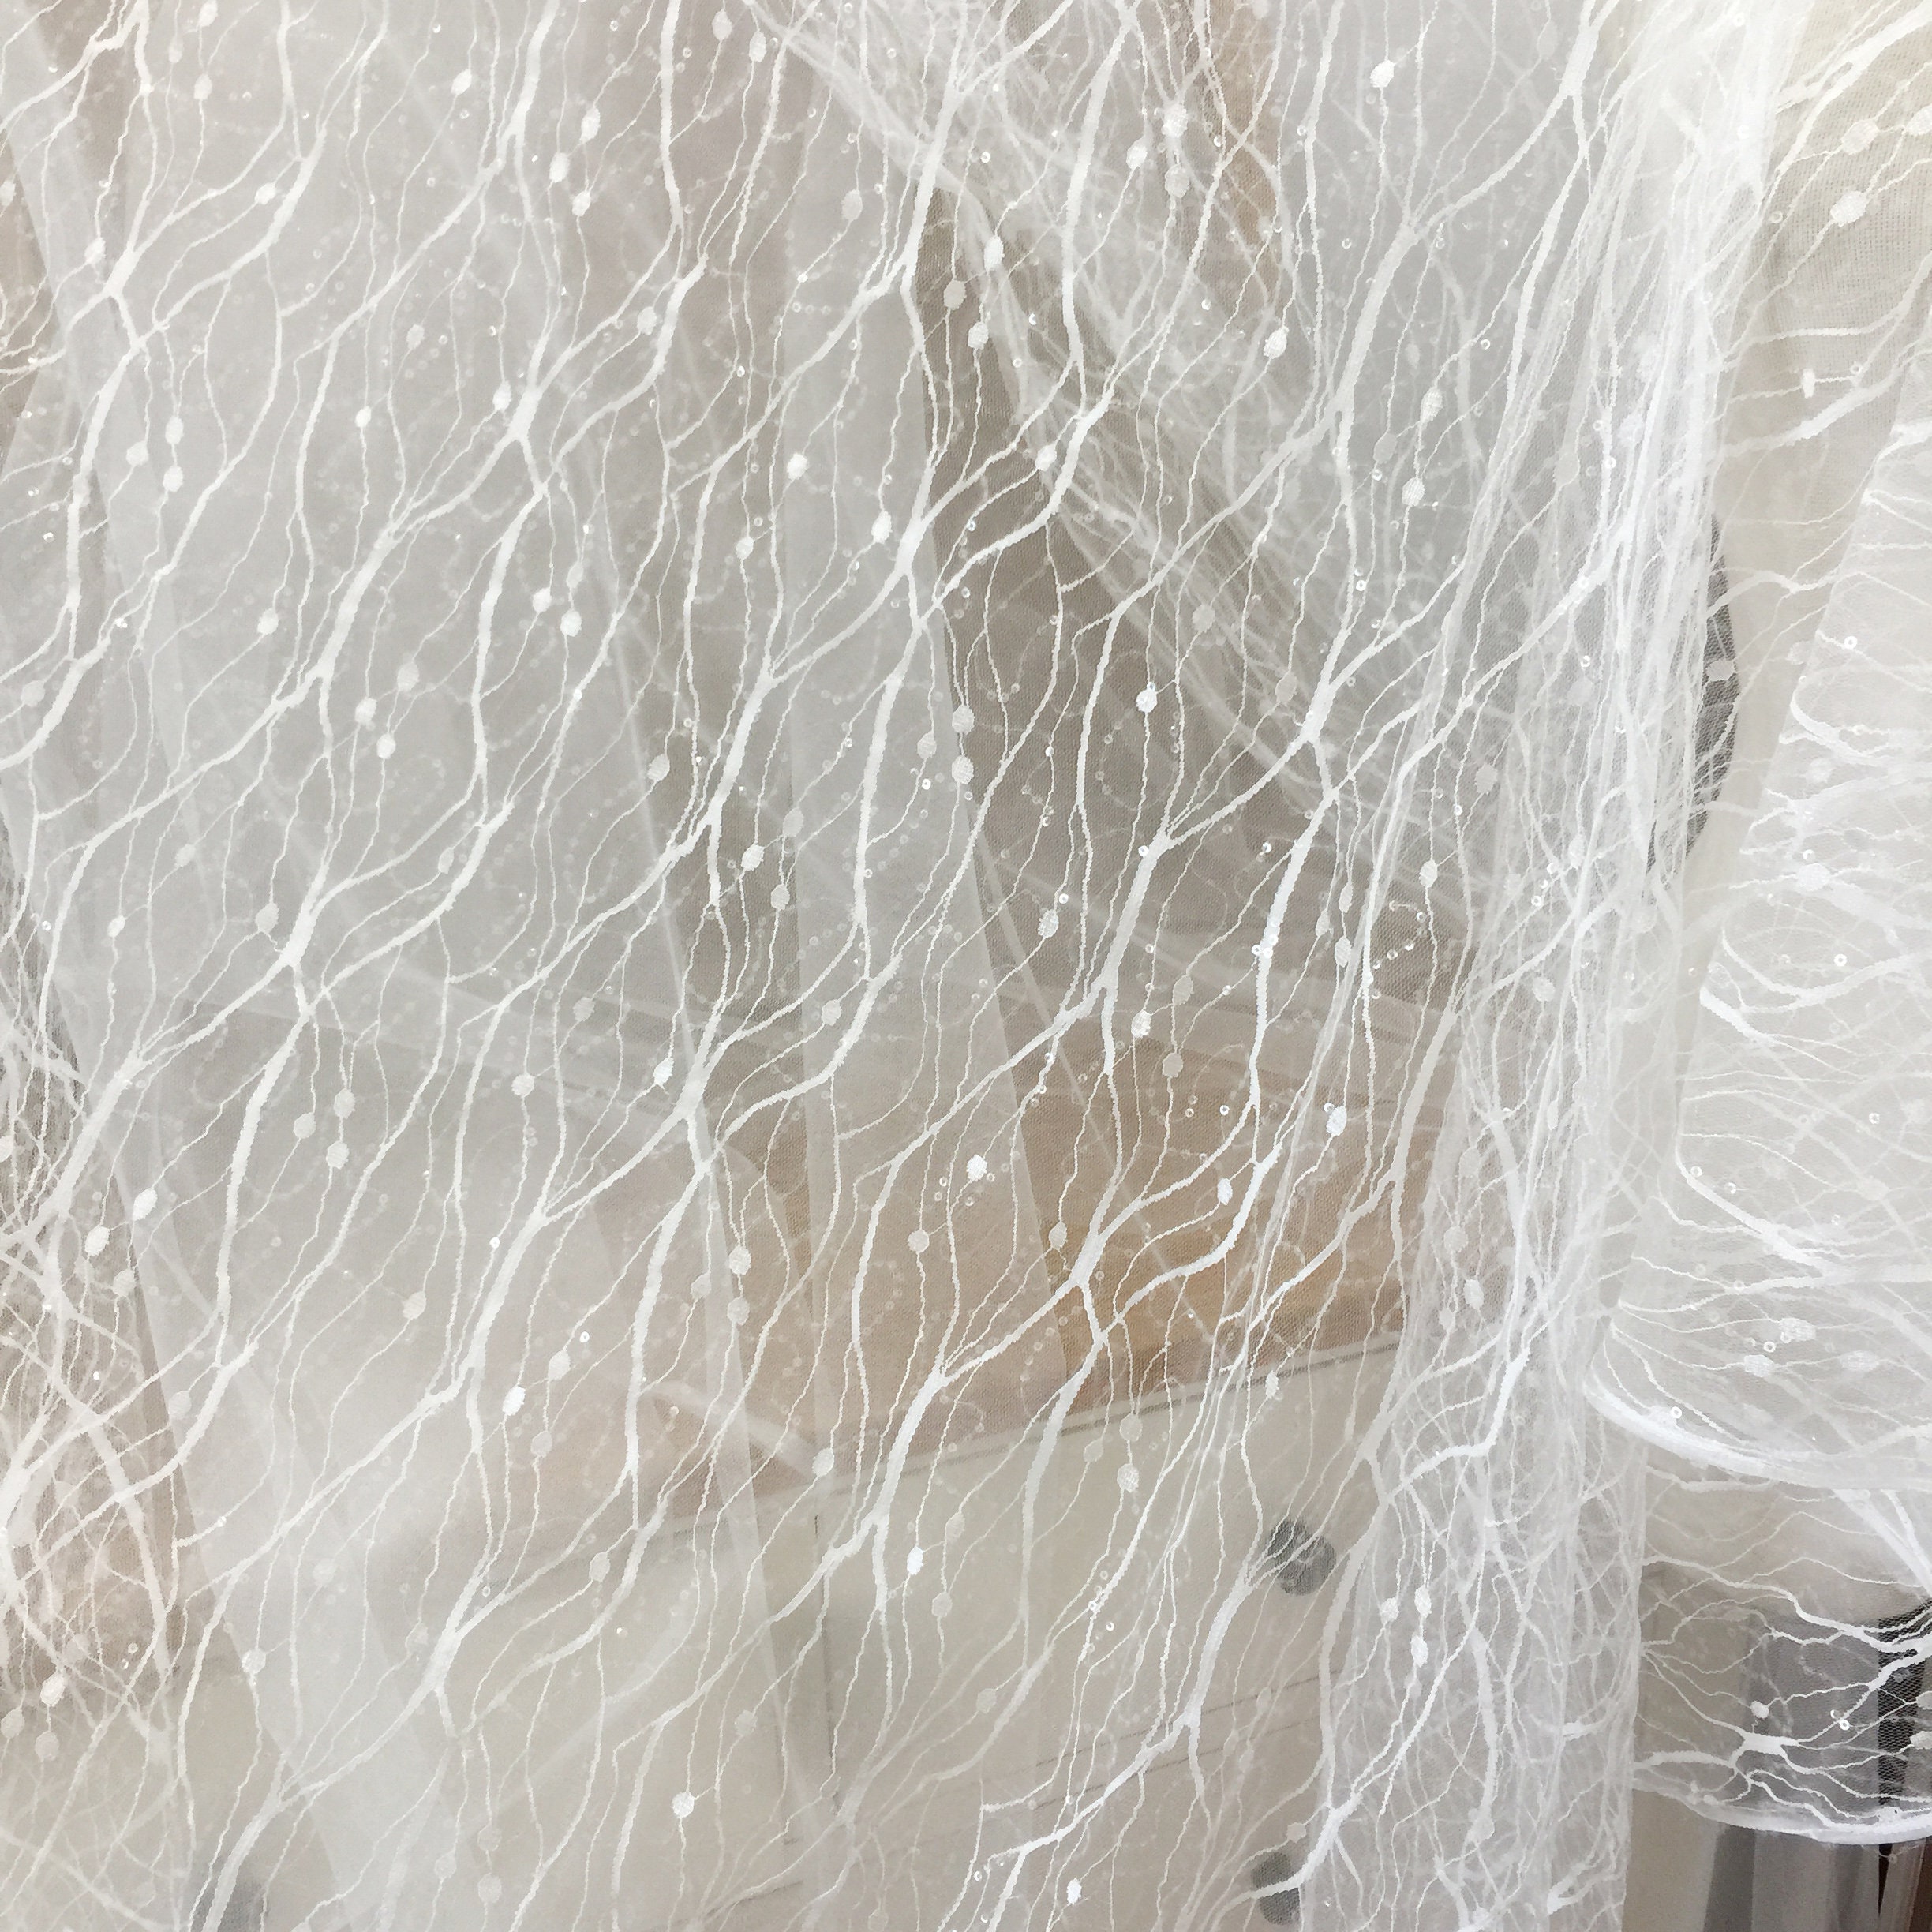 5 Yards /lot Stripe Tulle Lace Fabric , Clear Sequin Bridal Veil Wedding  Bodice Lining Fabric in Wholesale Price 140cm Wide -  Hong Kong